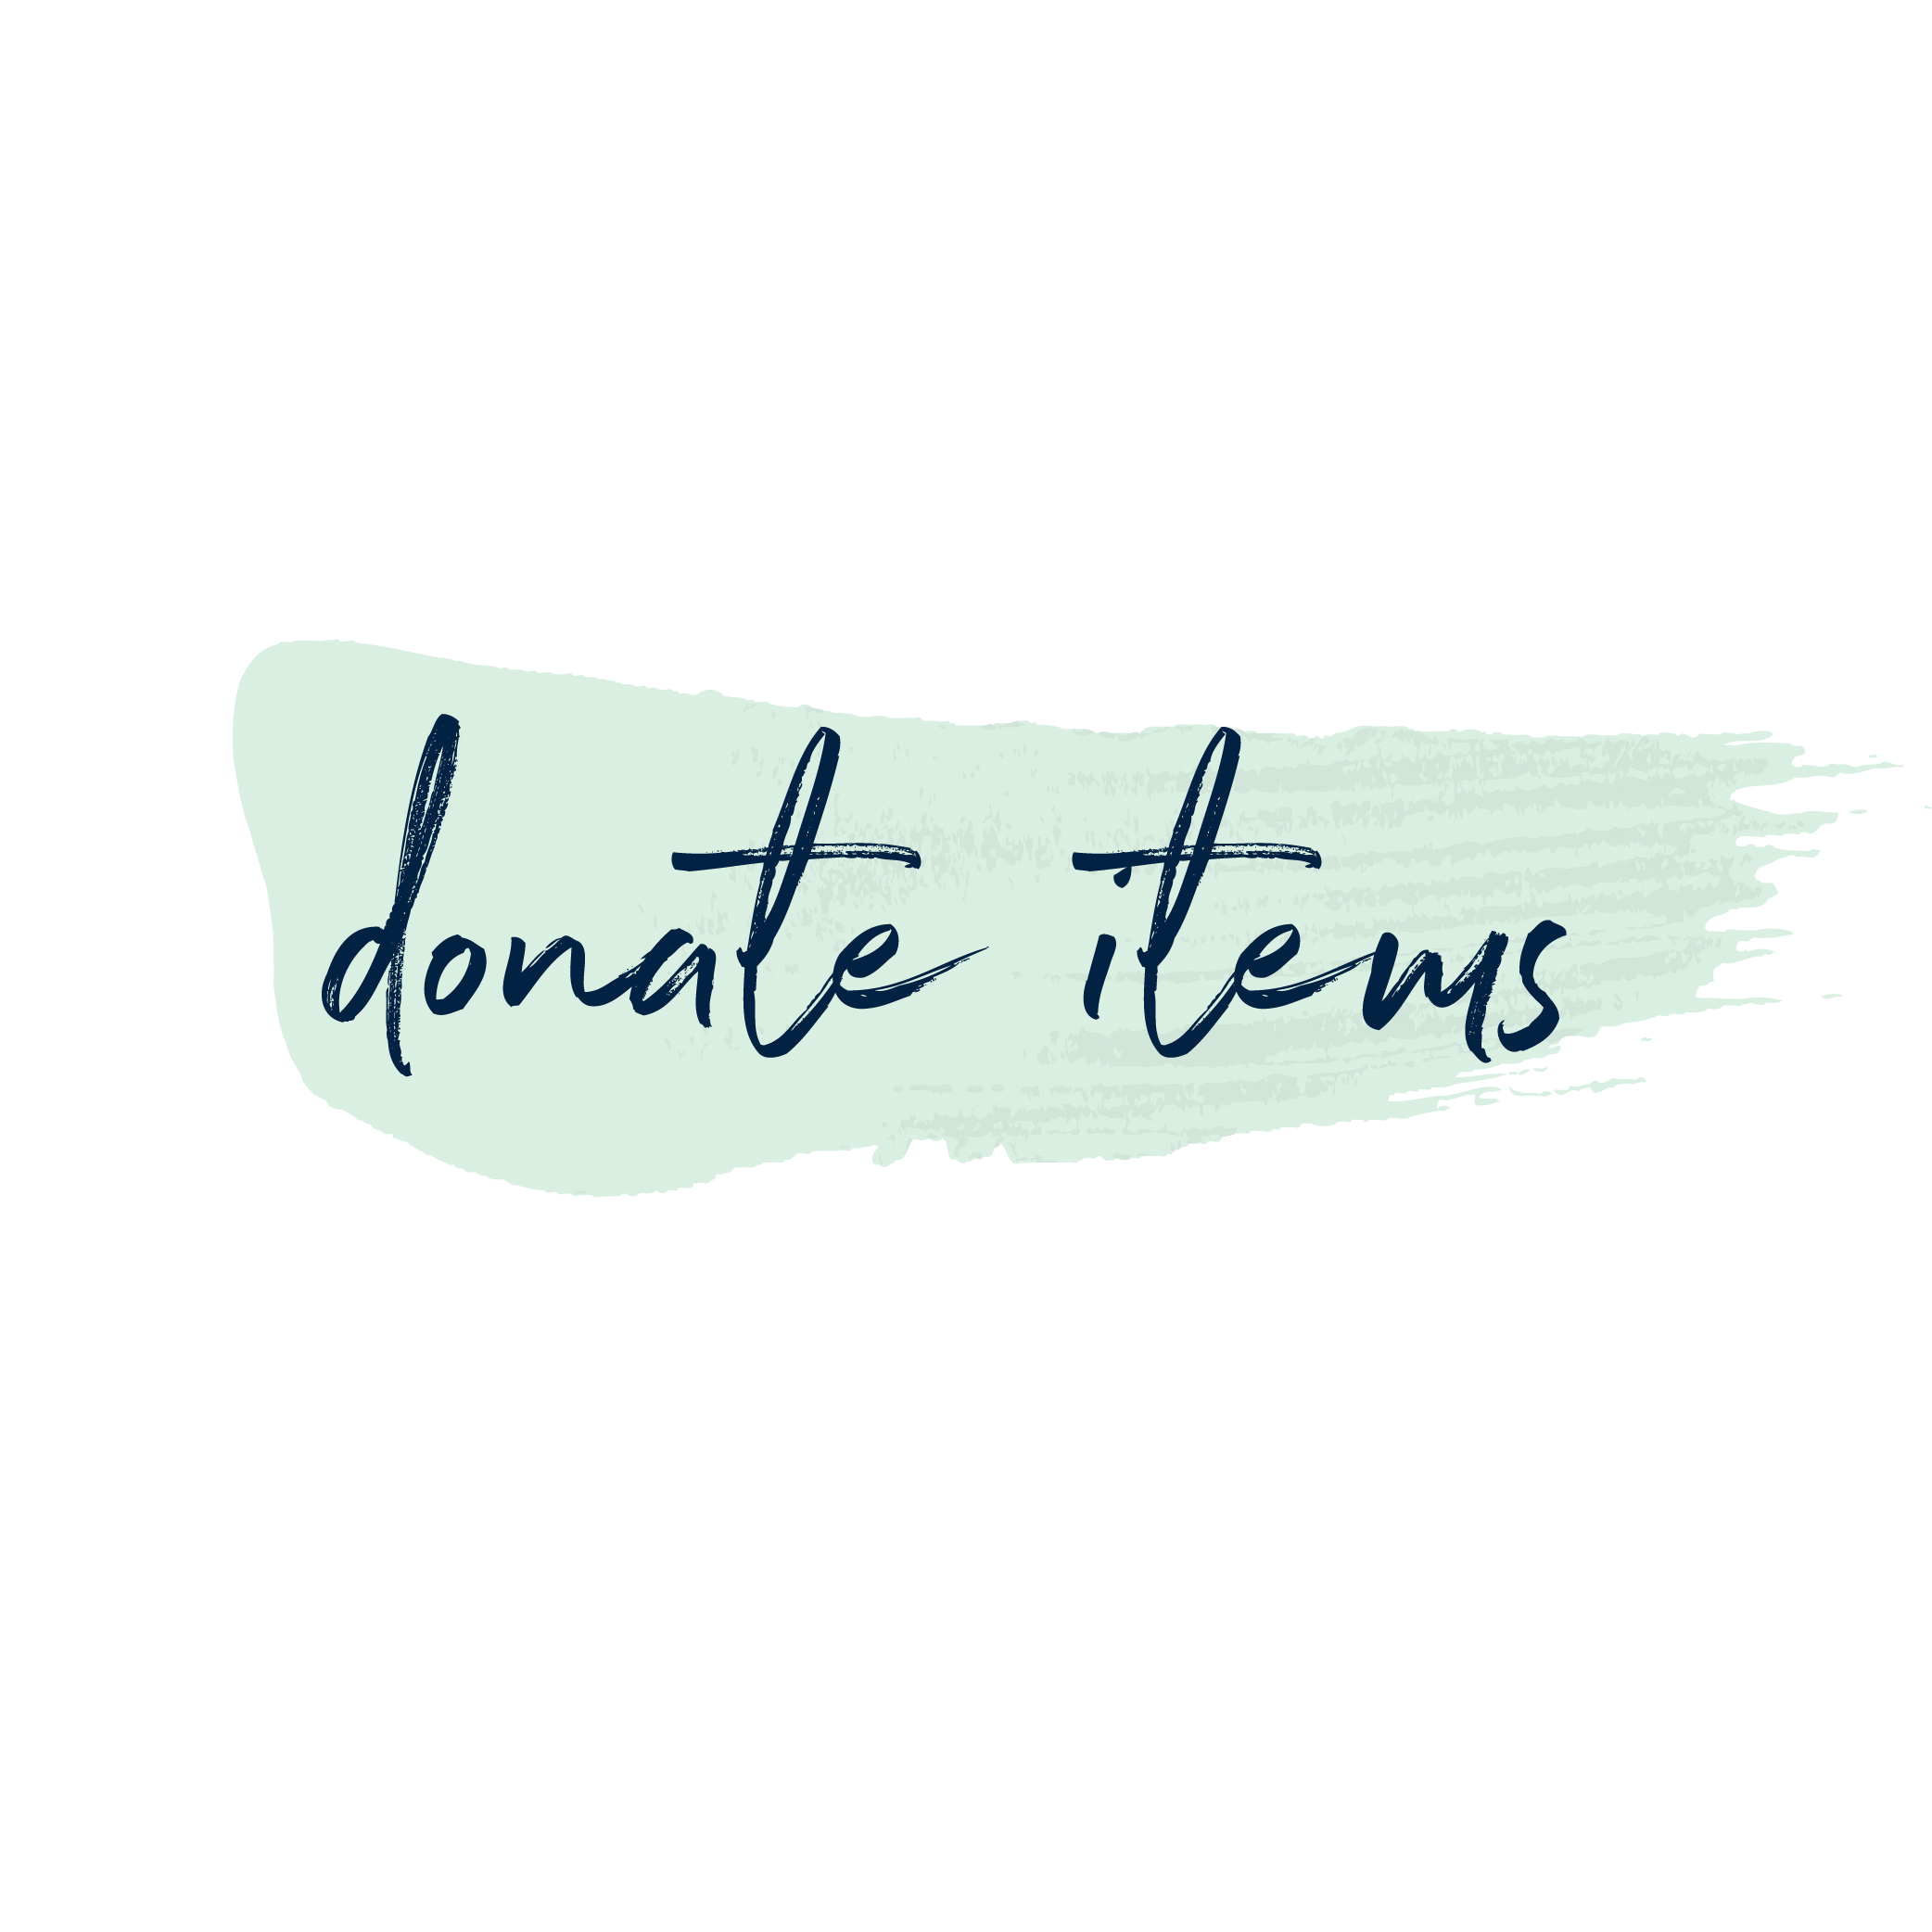 Copy of donate items